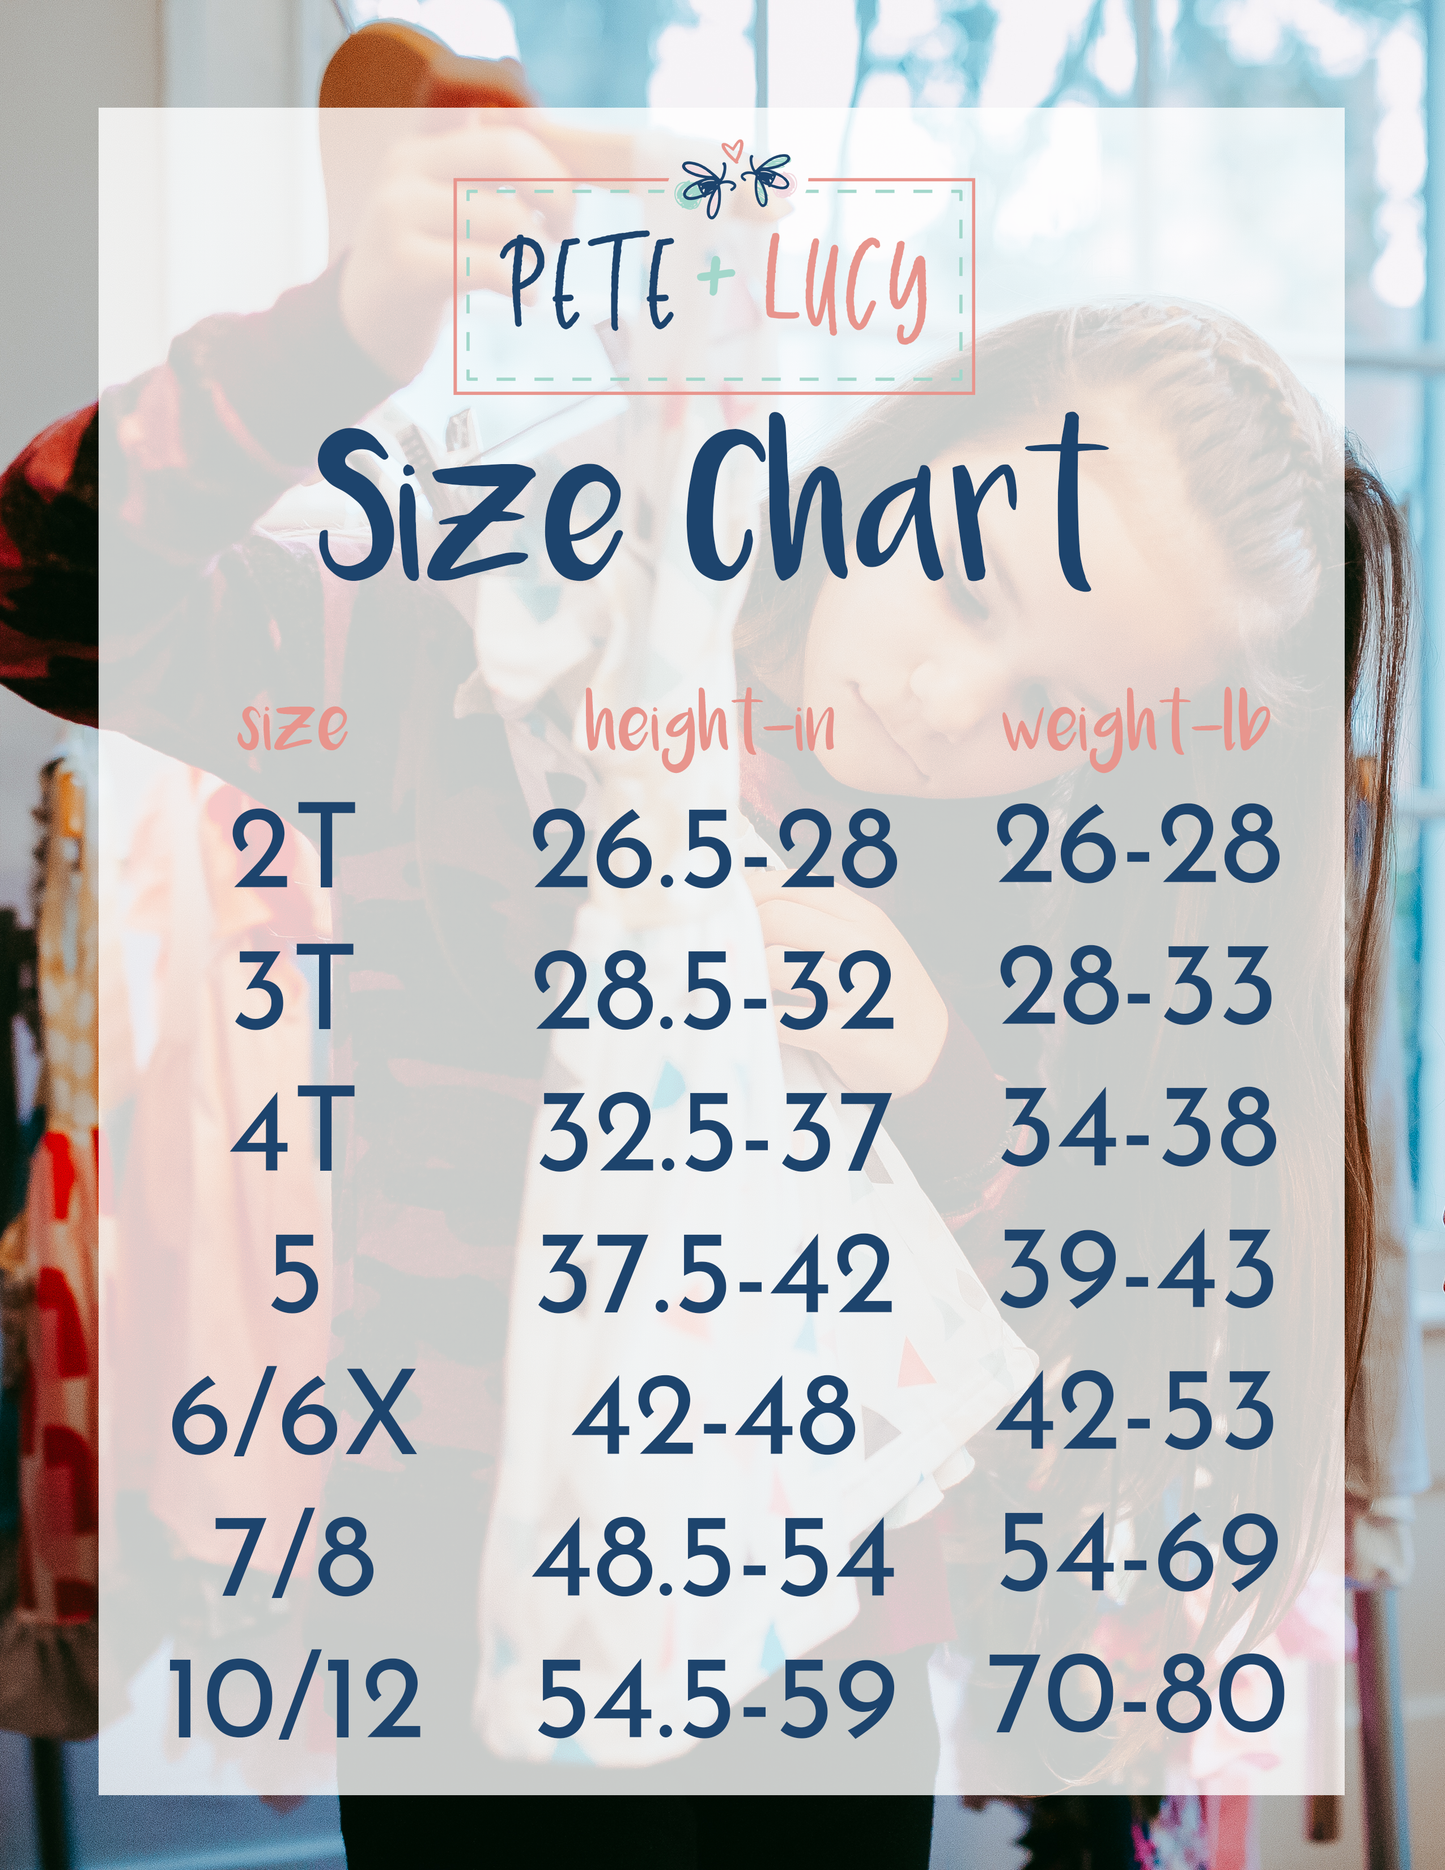 (Preorder) Glass Slipper Dress by Pete + Lucy